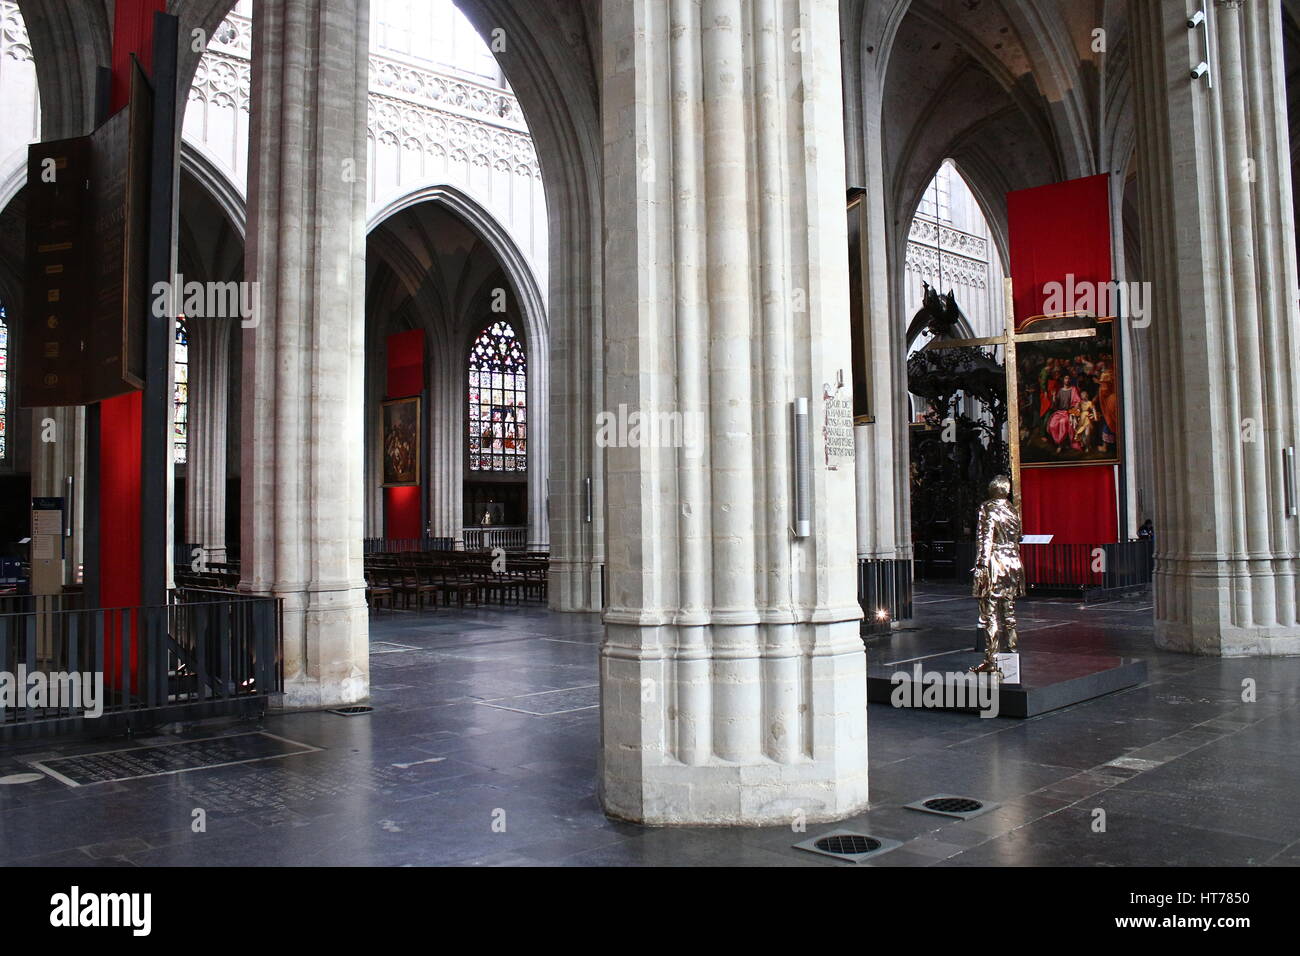 Columns of the nave  - interior of the Gothic Cathedral of our Lady (Onze-lieve-vrouwekathedraal), Antwerp, Belgium Stock Photo